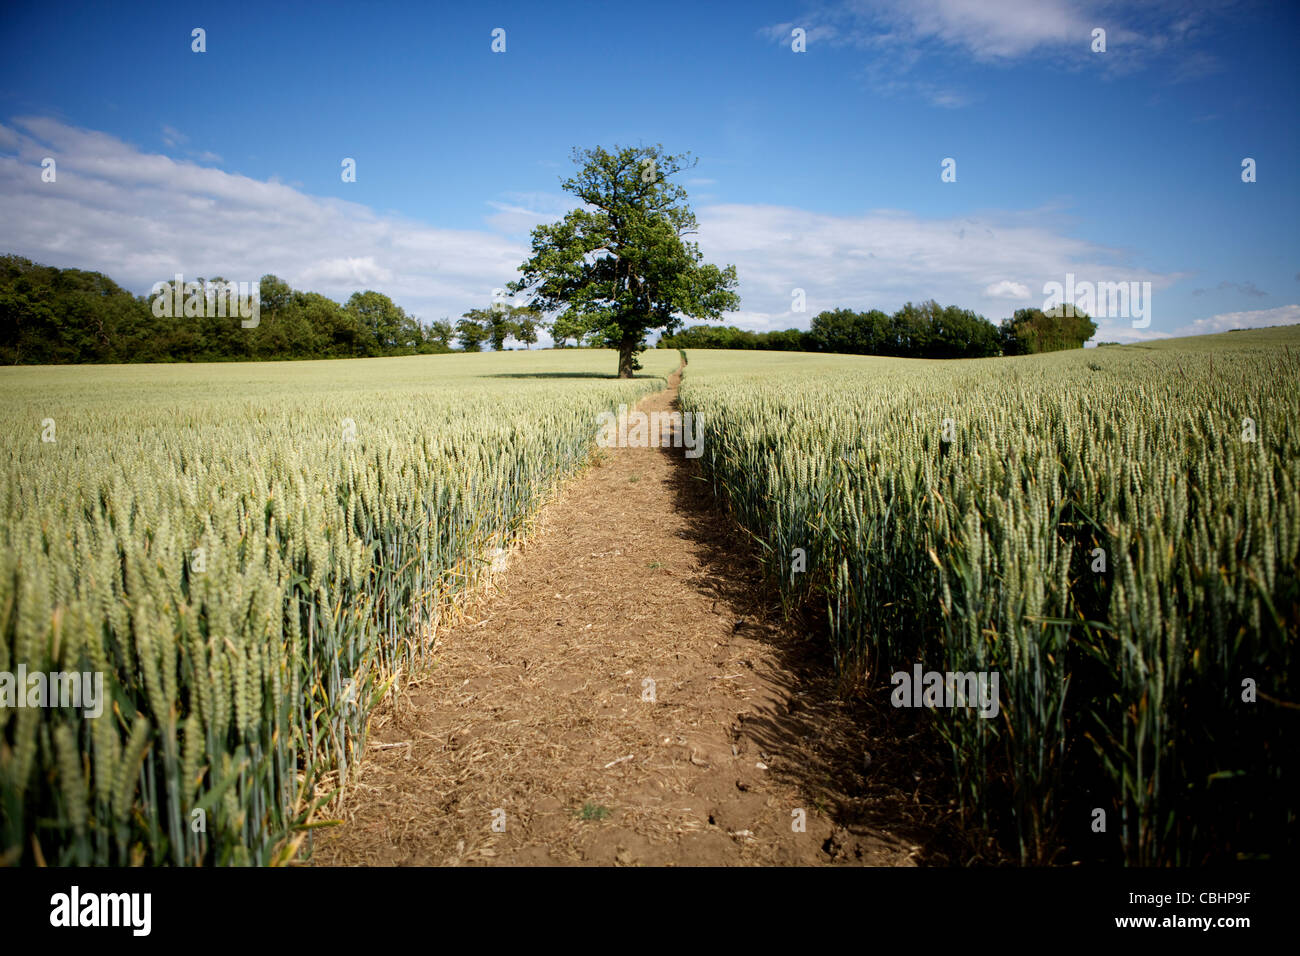 Ripening Wheat Crop with Tree and Footpath Stock Photo